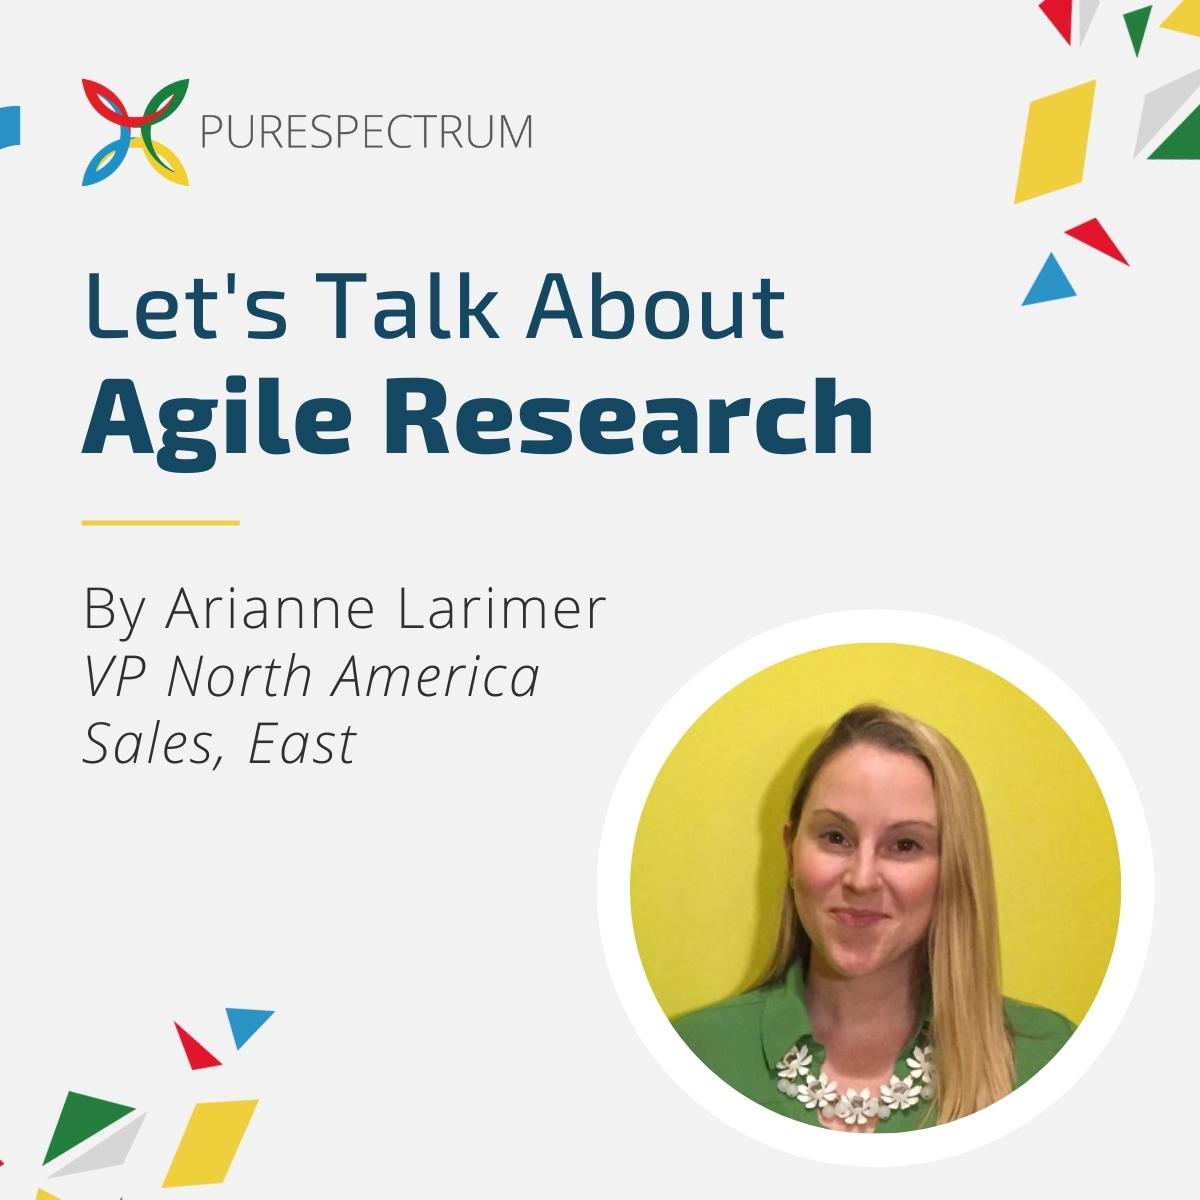 let's talk about agile research by arianne larimer